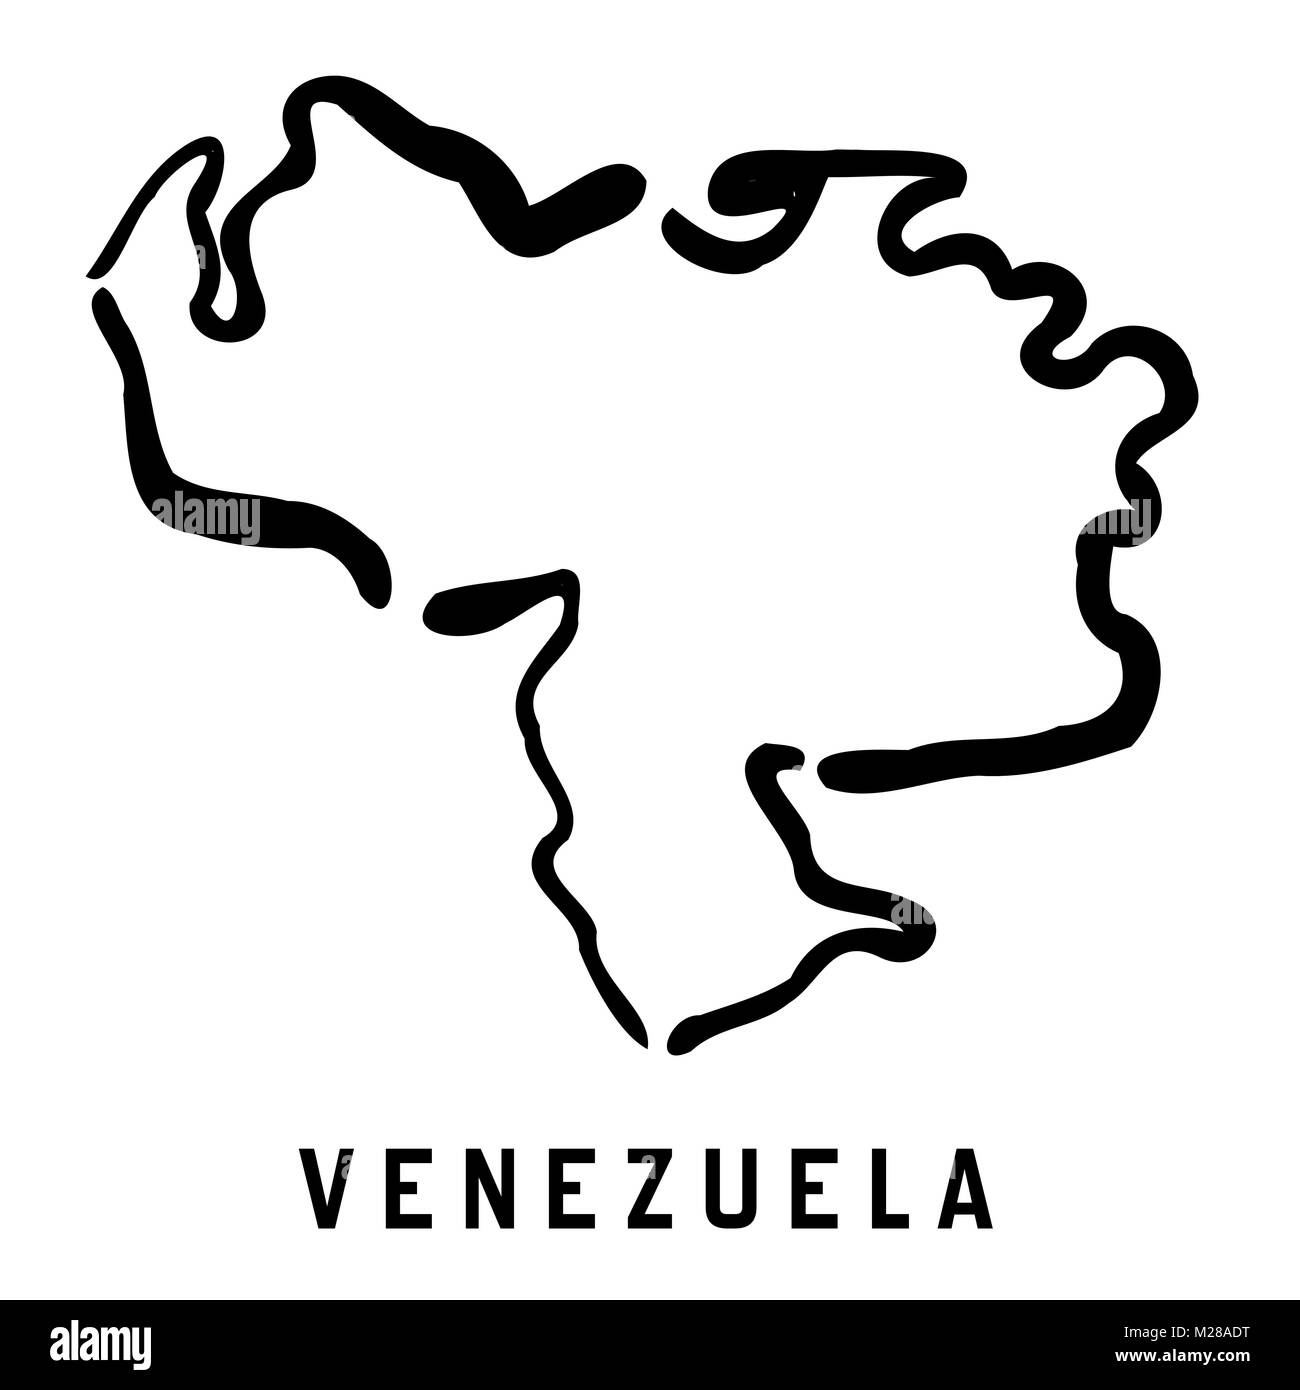 Venezuela map outline - smooth simplified country shape map vector. Stock Vector